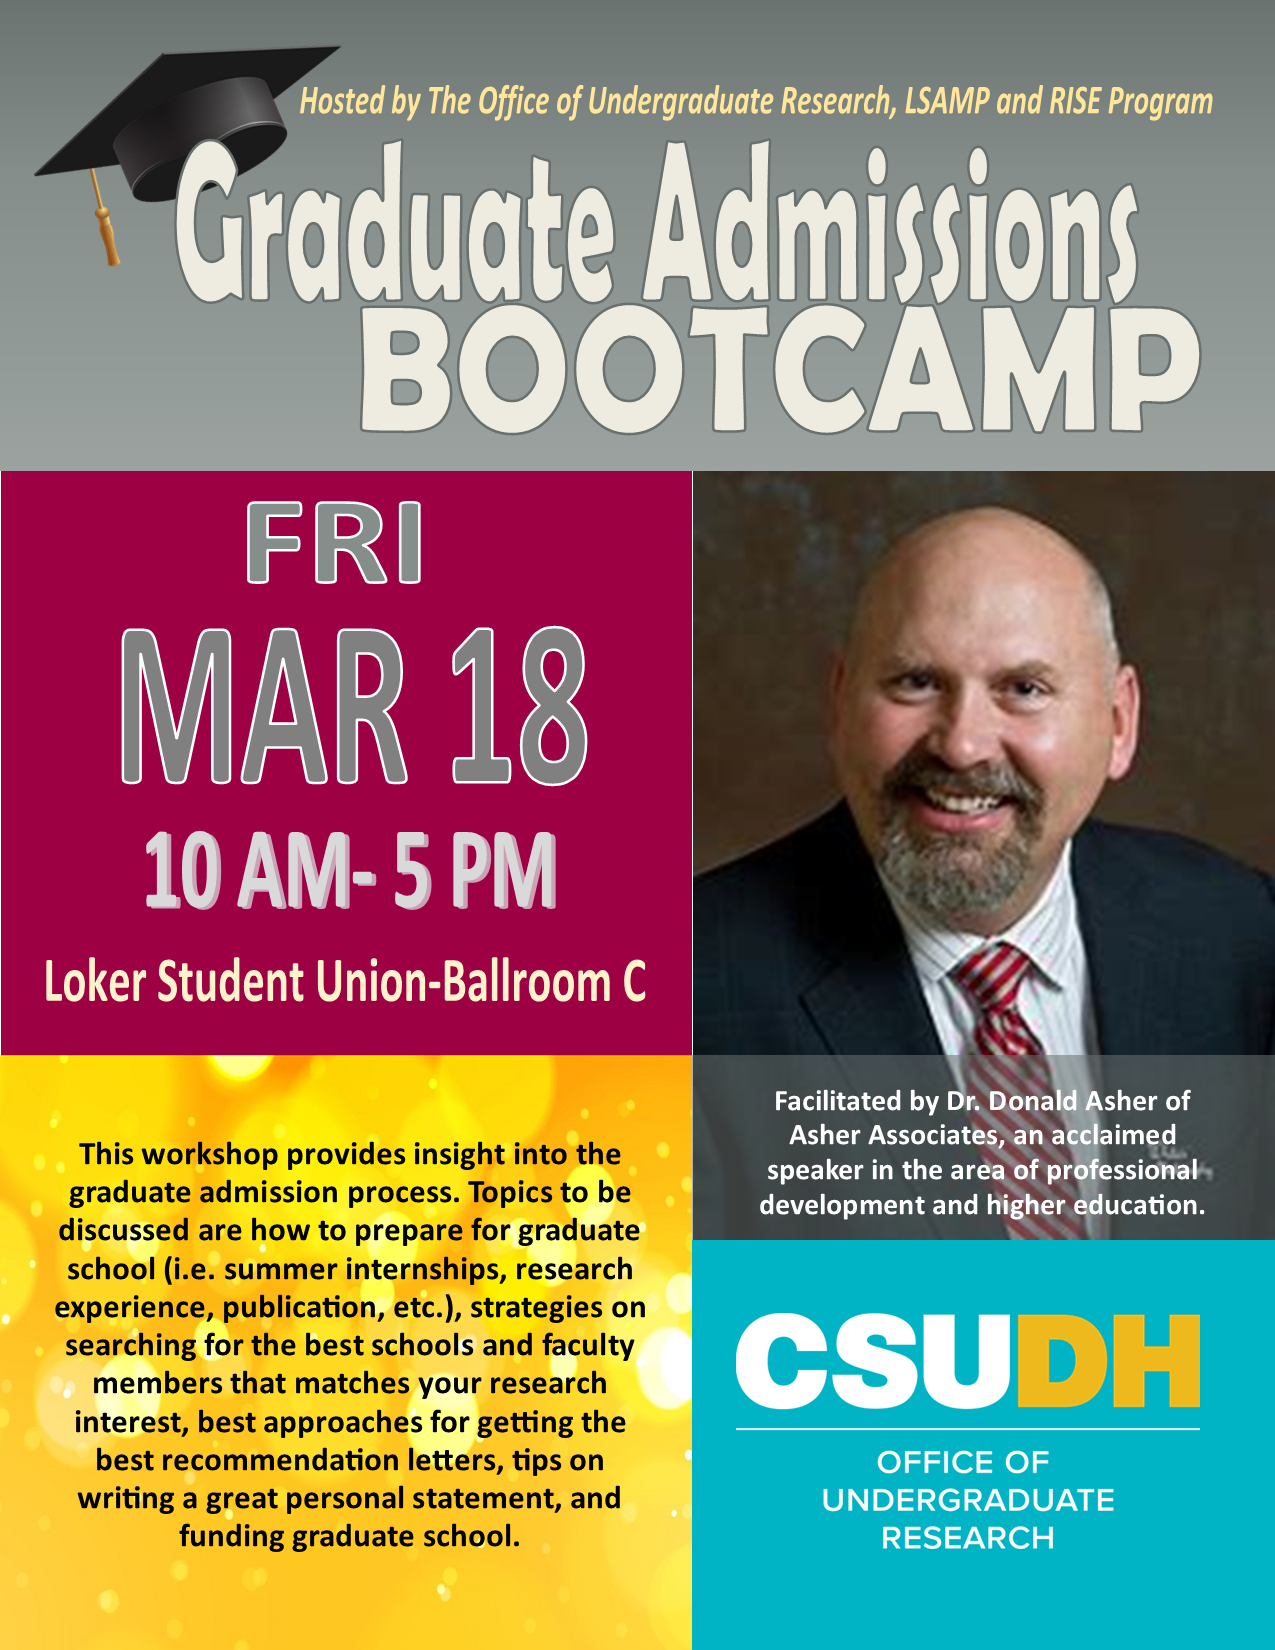 Graduate Admissions Bootcamp Flyer 